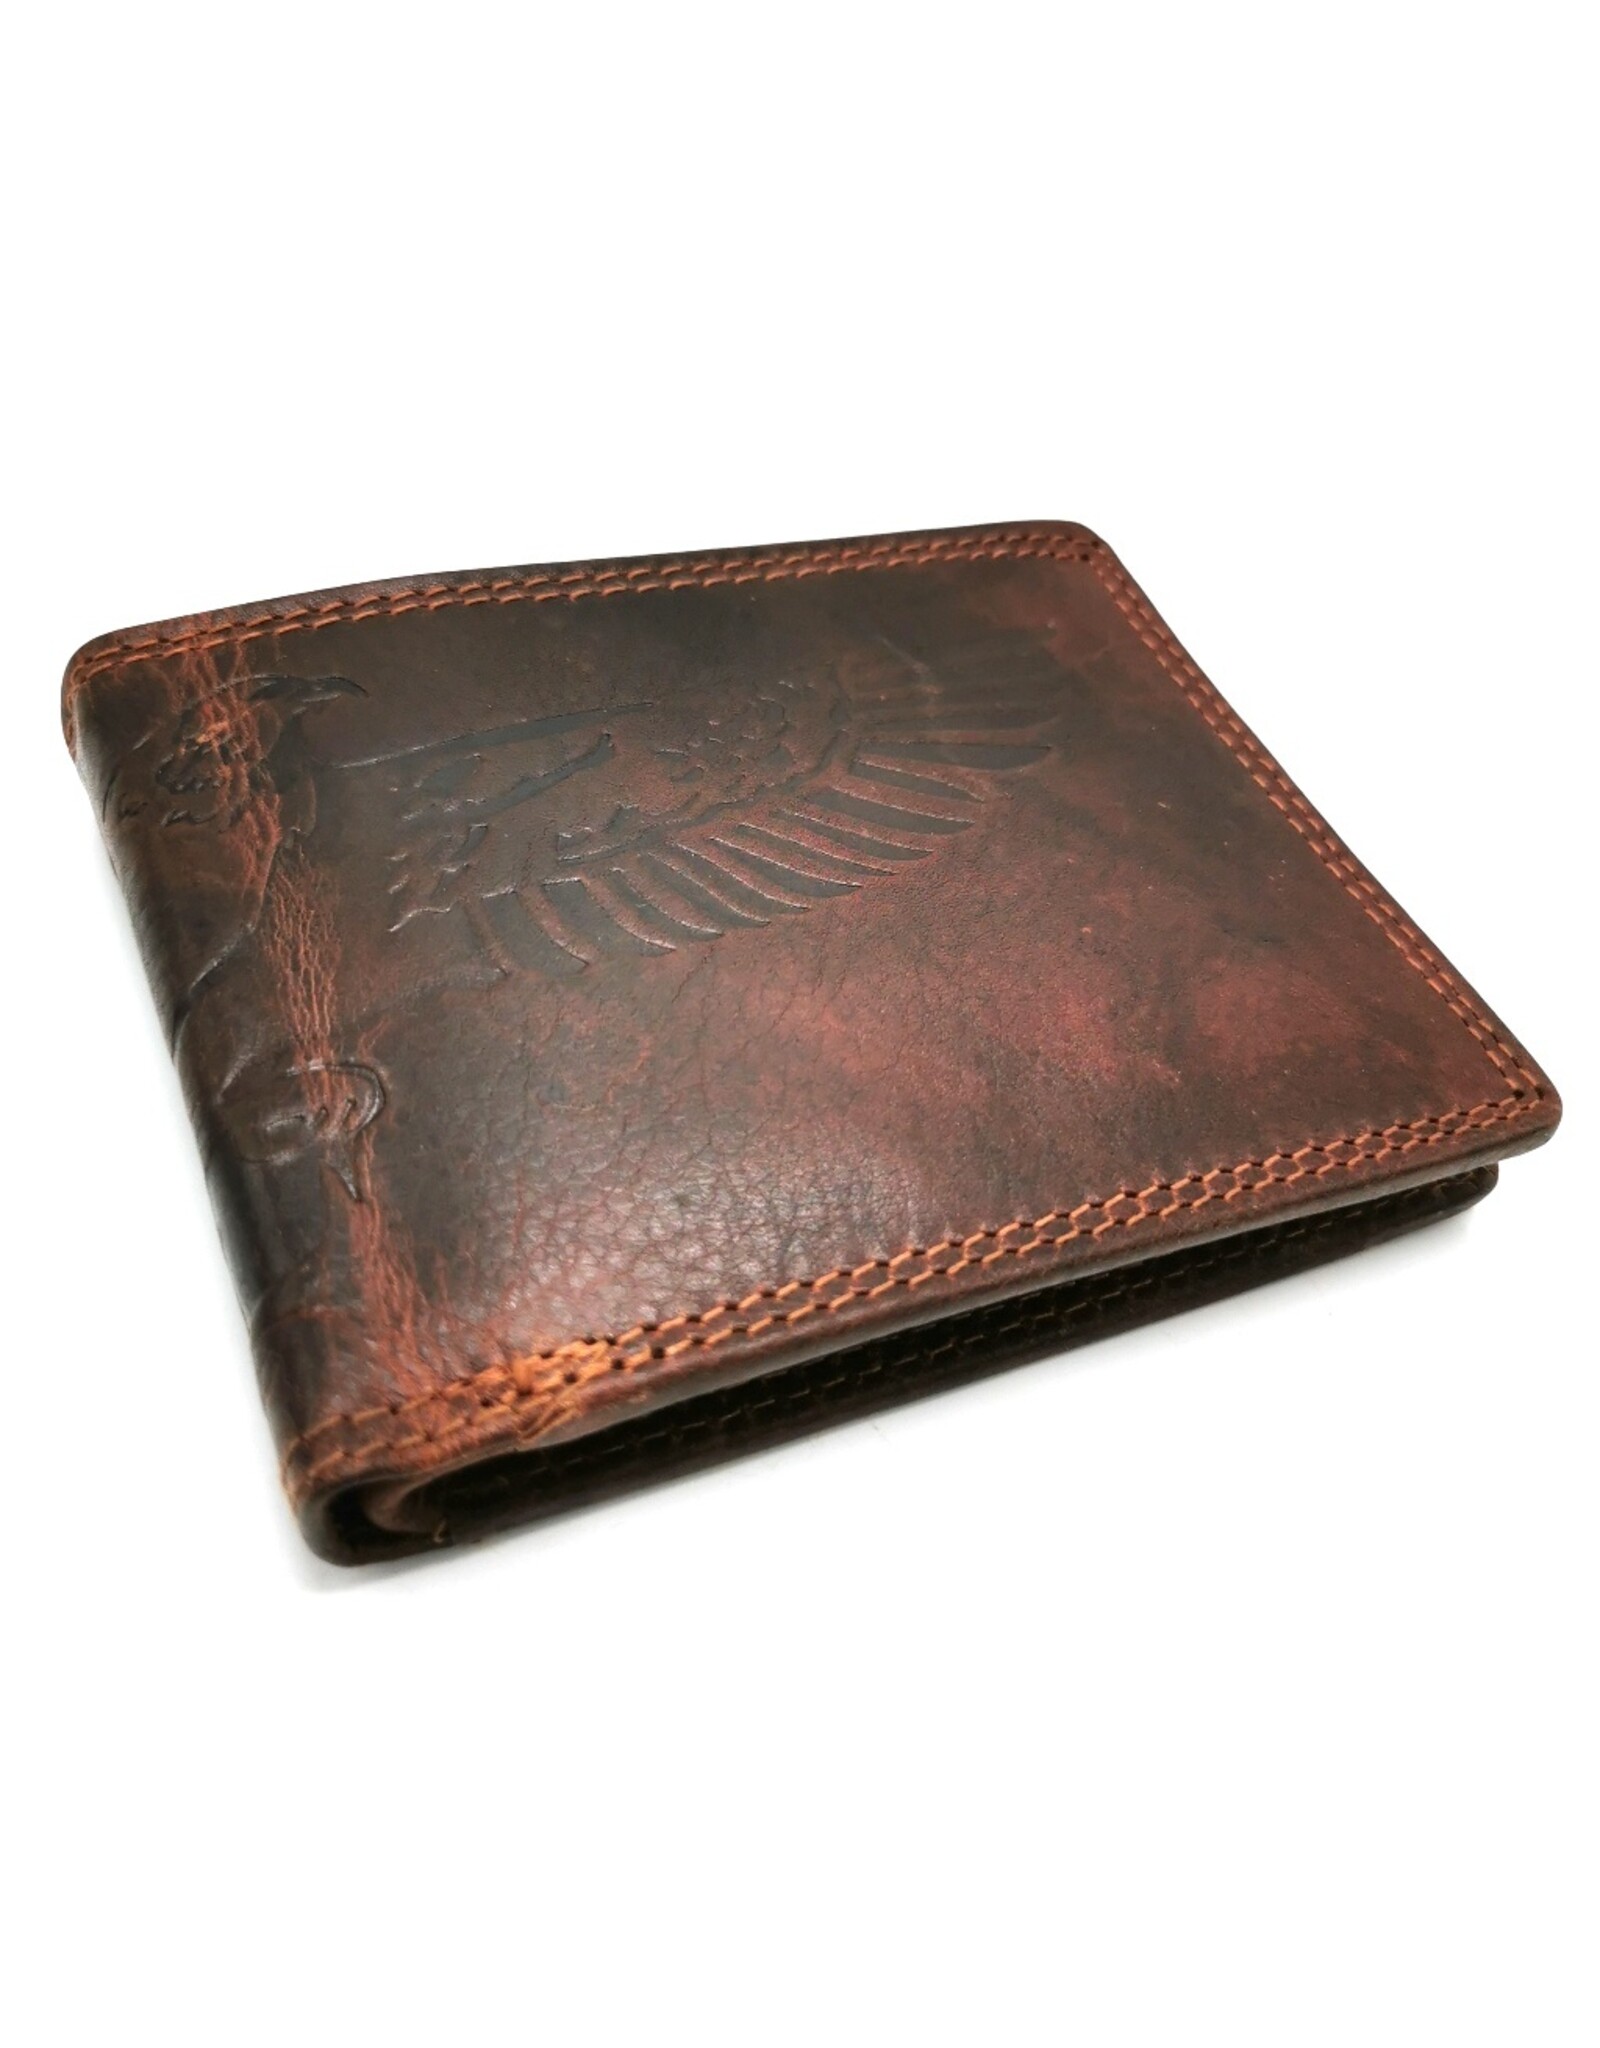 HillBurry Leather Wallets -  Hütmann Leather Wallet with embossed Eagle